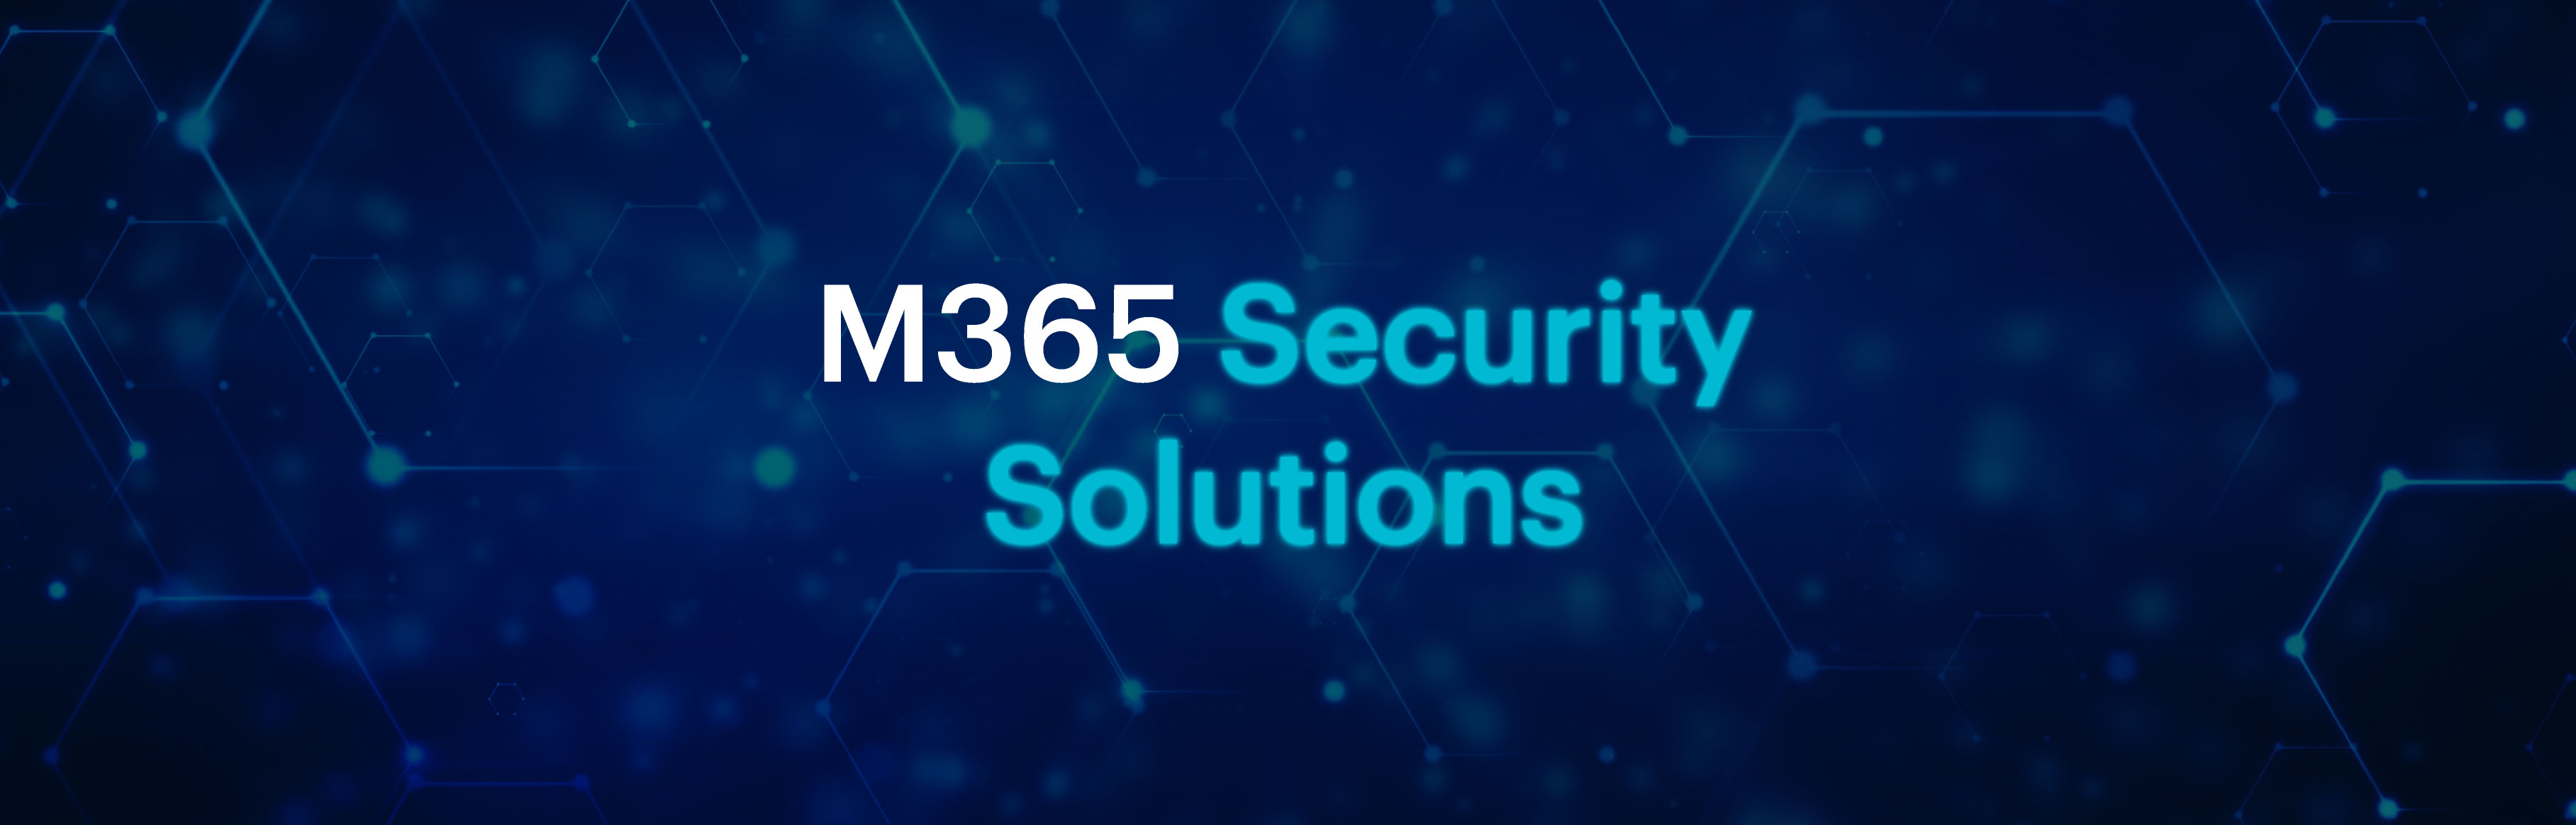 M365 Security Solutions